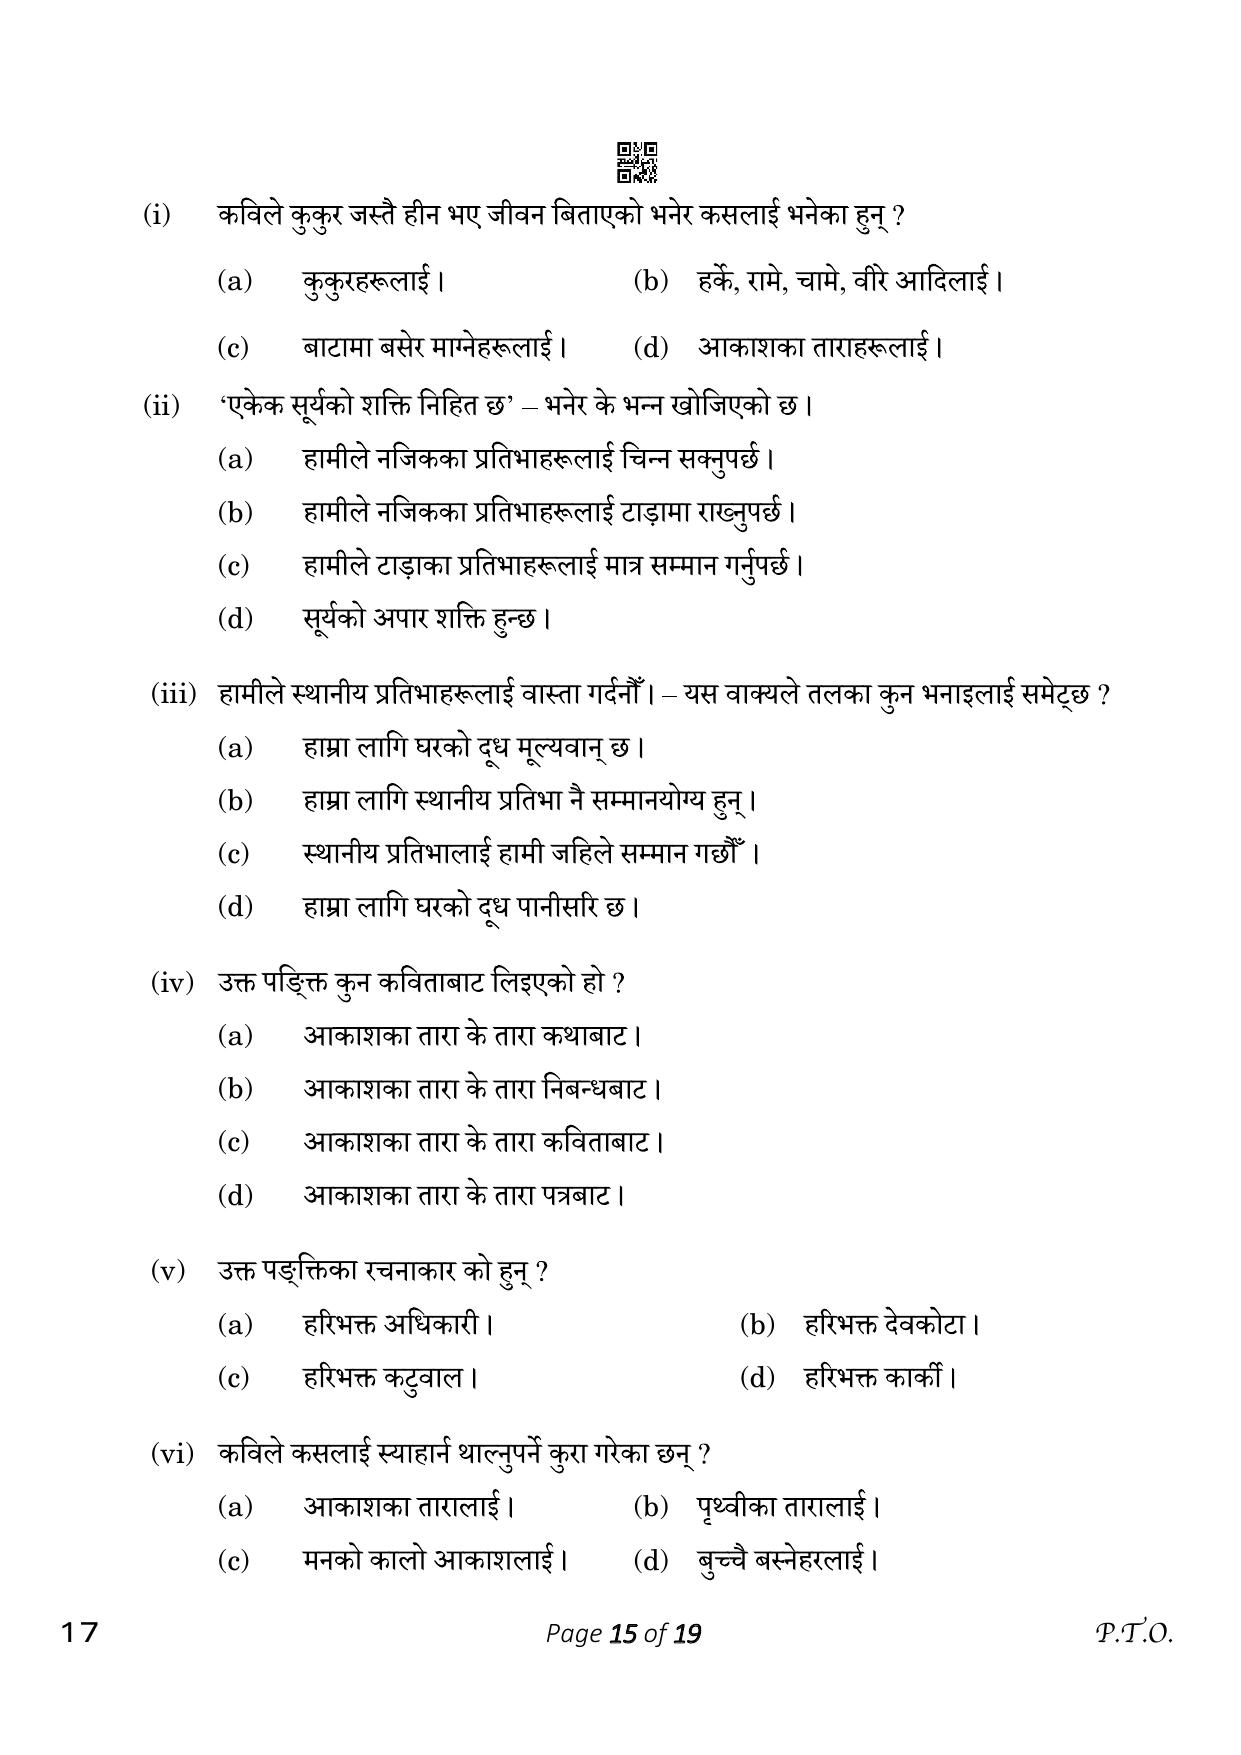 CBSE Class 10 Nepali (Compartment) 2023 Question Paper - Page 15